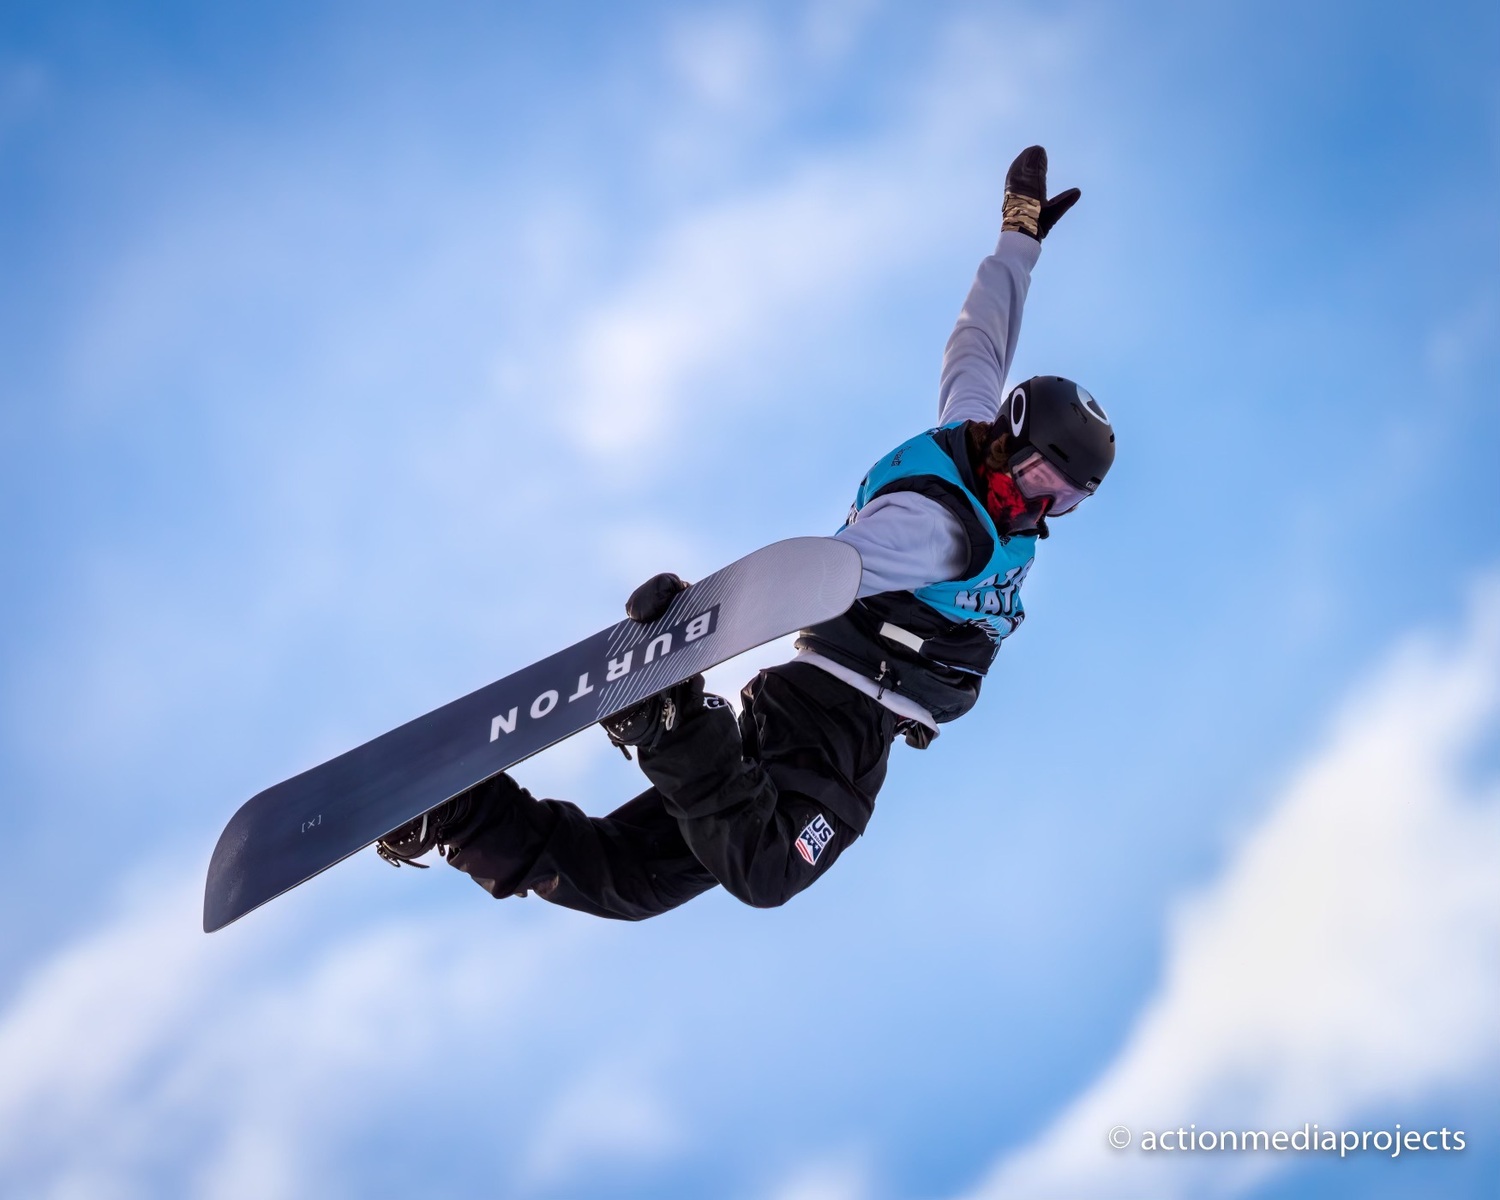 Montauk teen Noah Avallone will represent the U.S. at the 2024 Youth Olympics in South Korea as a member of the snowboard halfpipe team. ACTION MEDIA PROJECTS (ANTON VAN DER MERWE)